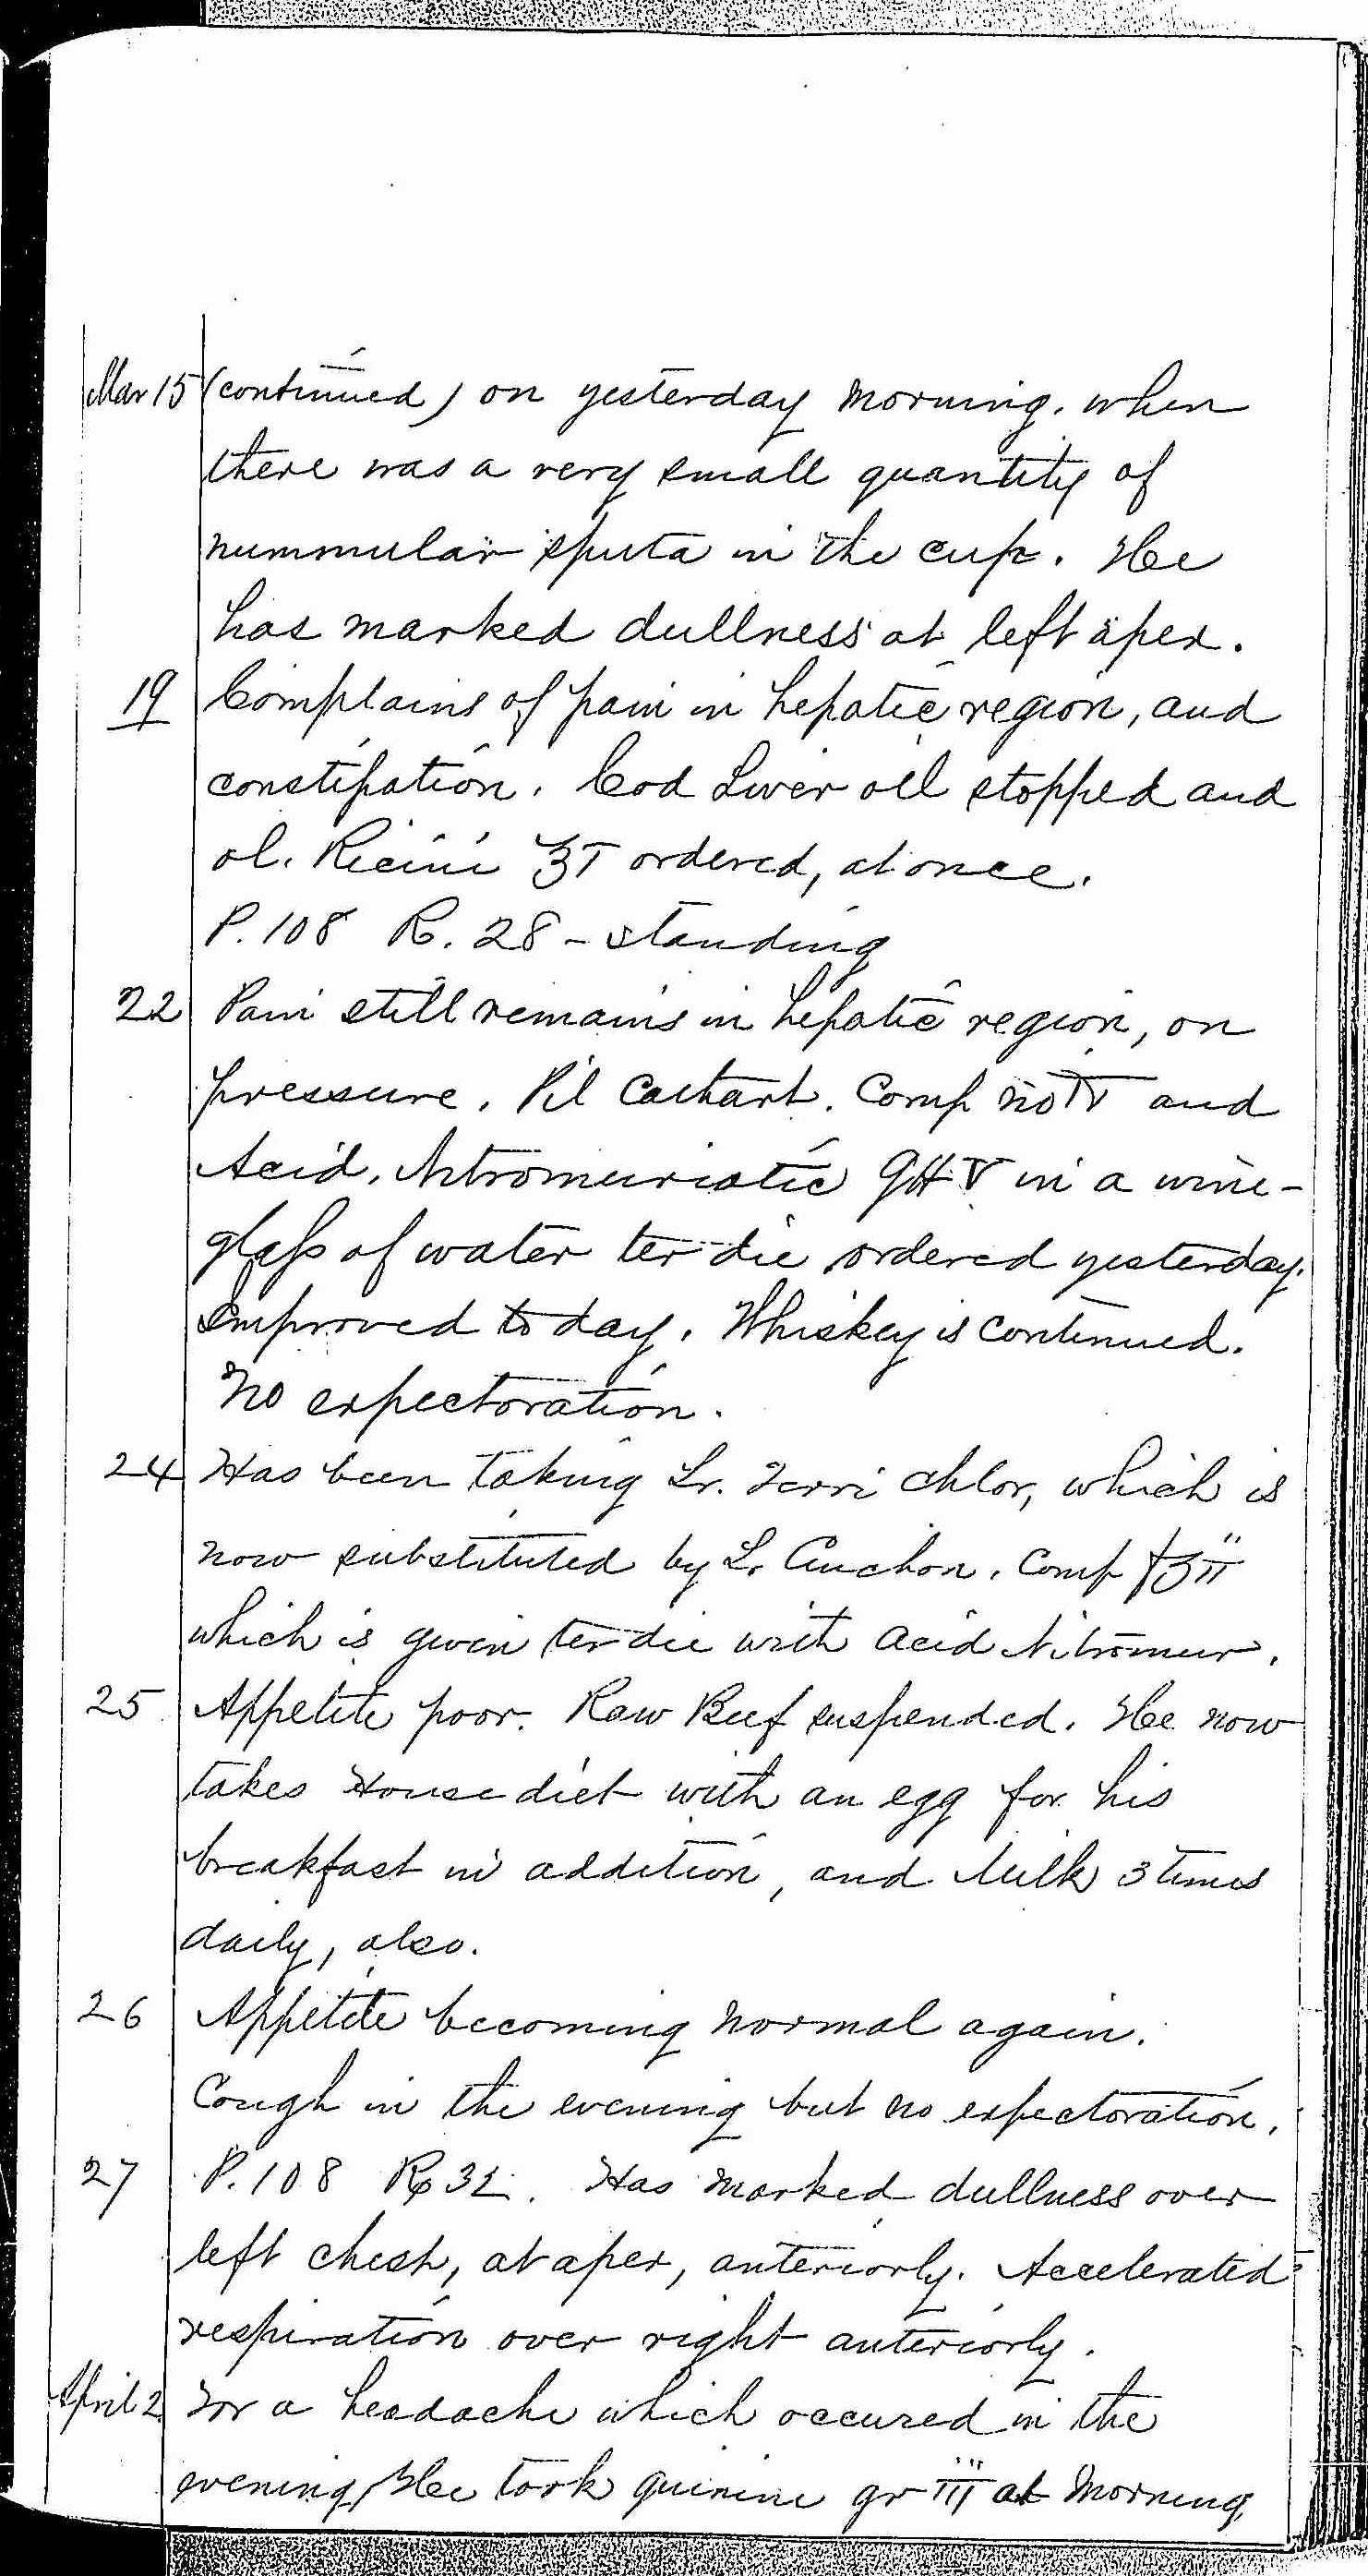 Entry for Richard Forn (page 17 of 21) in the log Hospital Tickets and Case Papers - Naval Hospital - Washington, D.C. - 1868-69